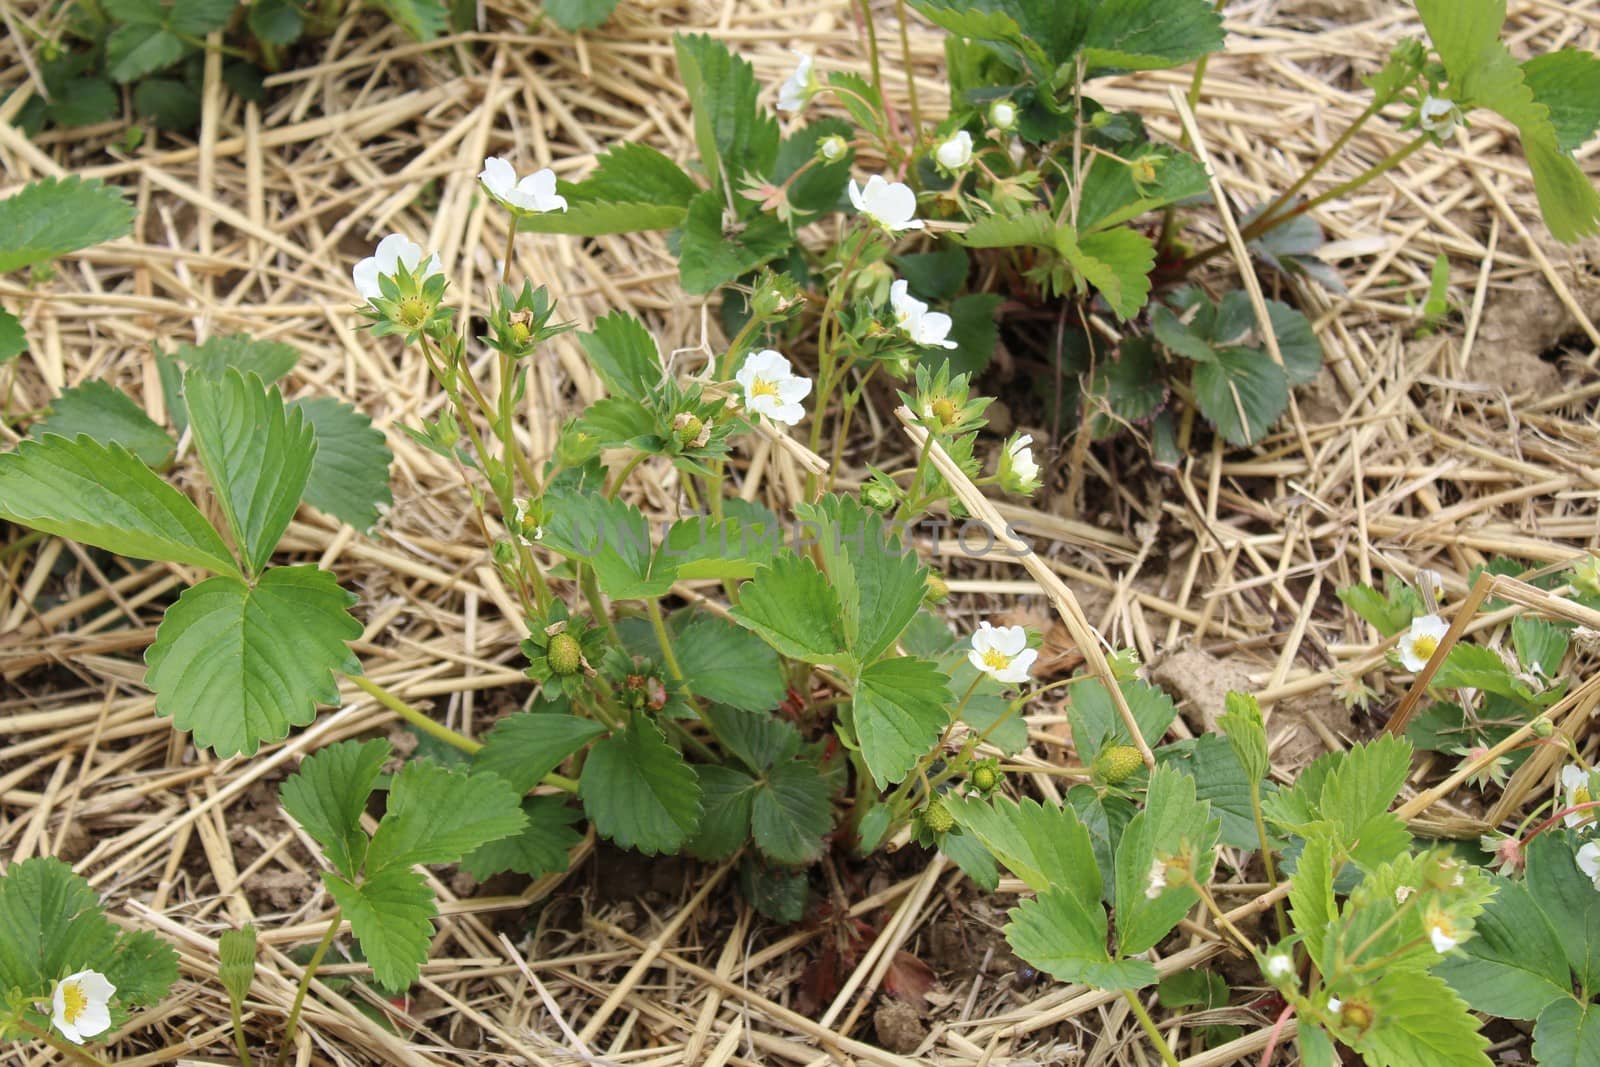 The picture shows strawberries with blossoms in the ground